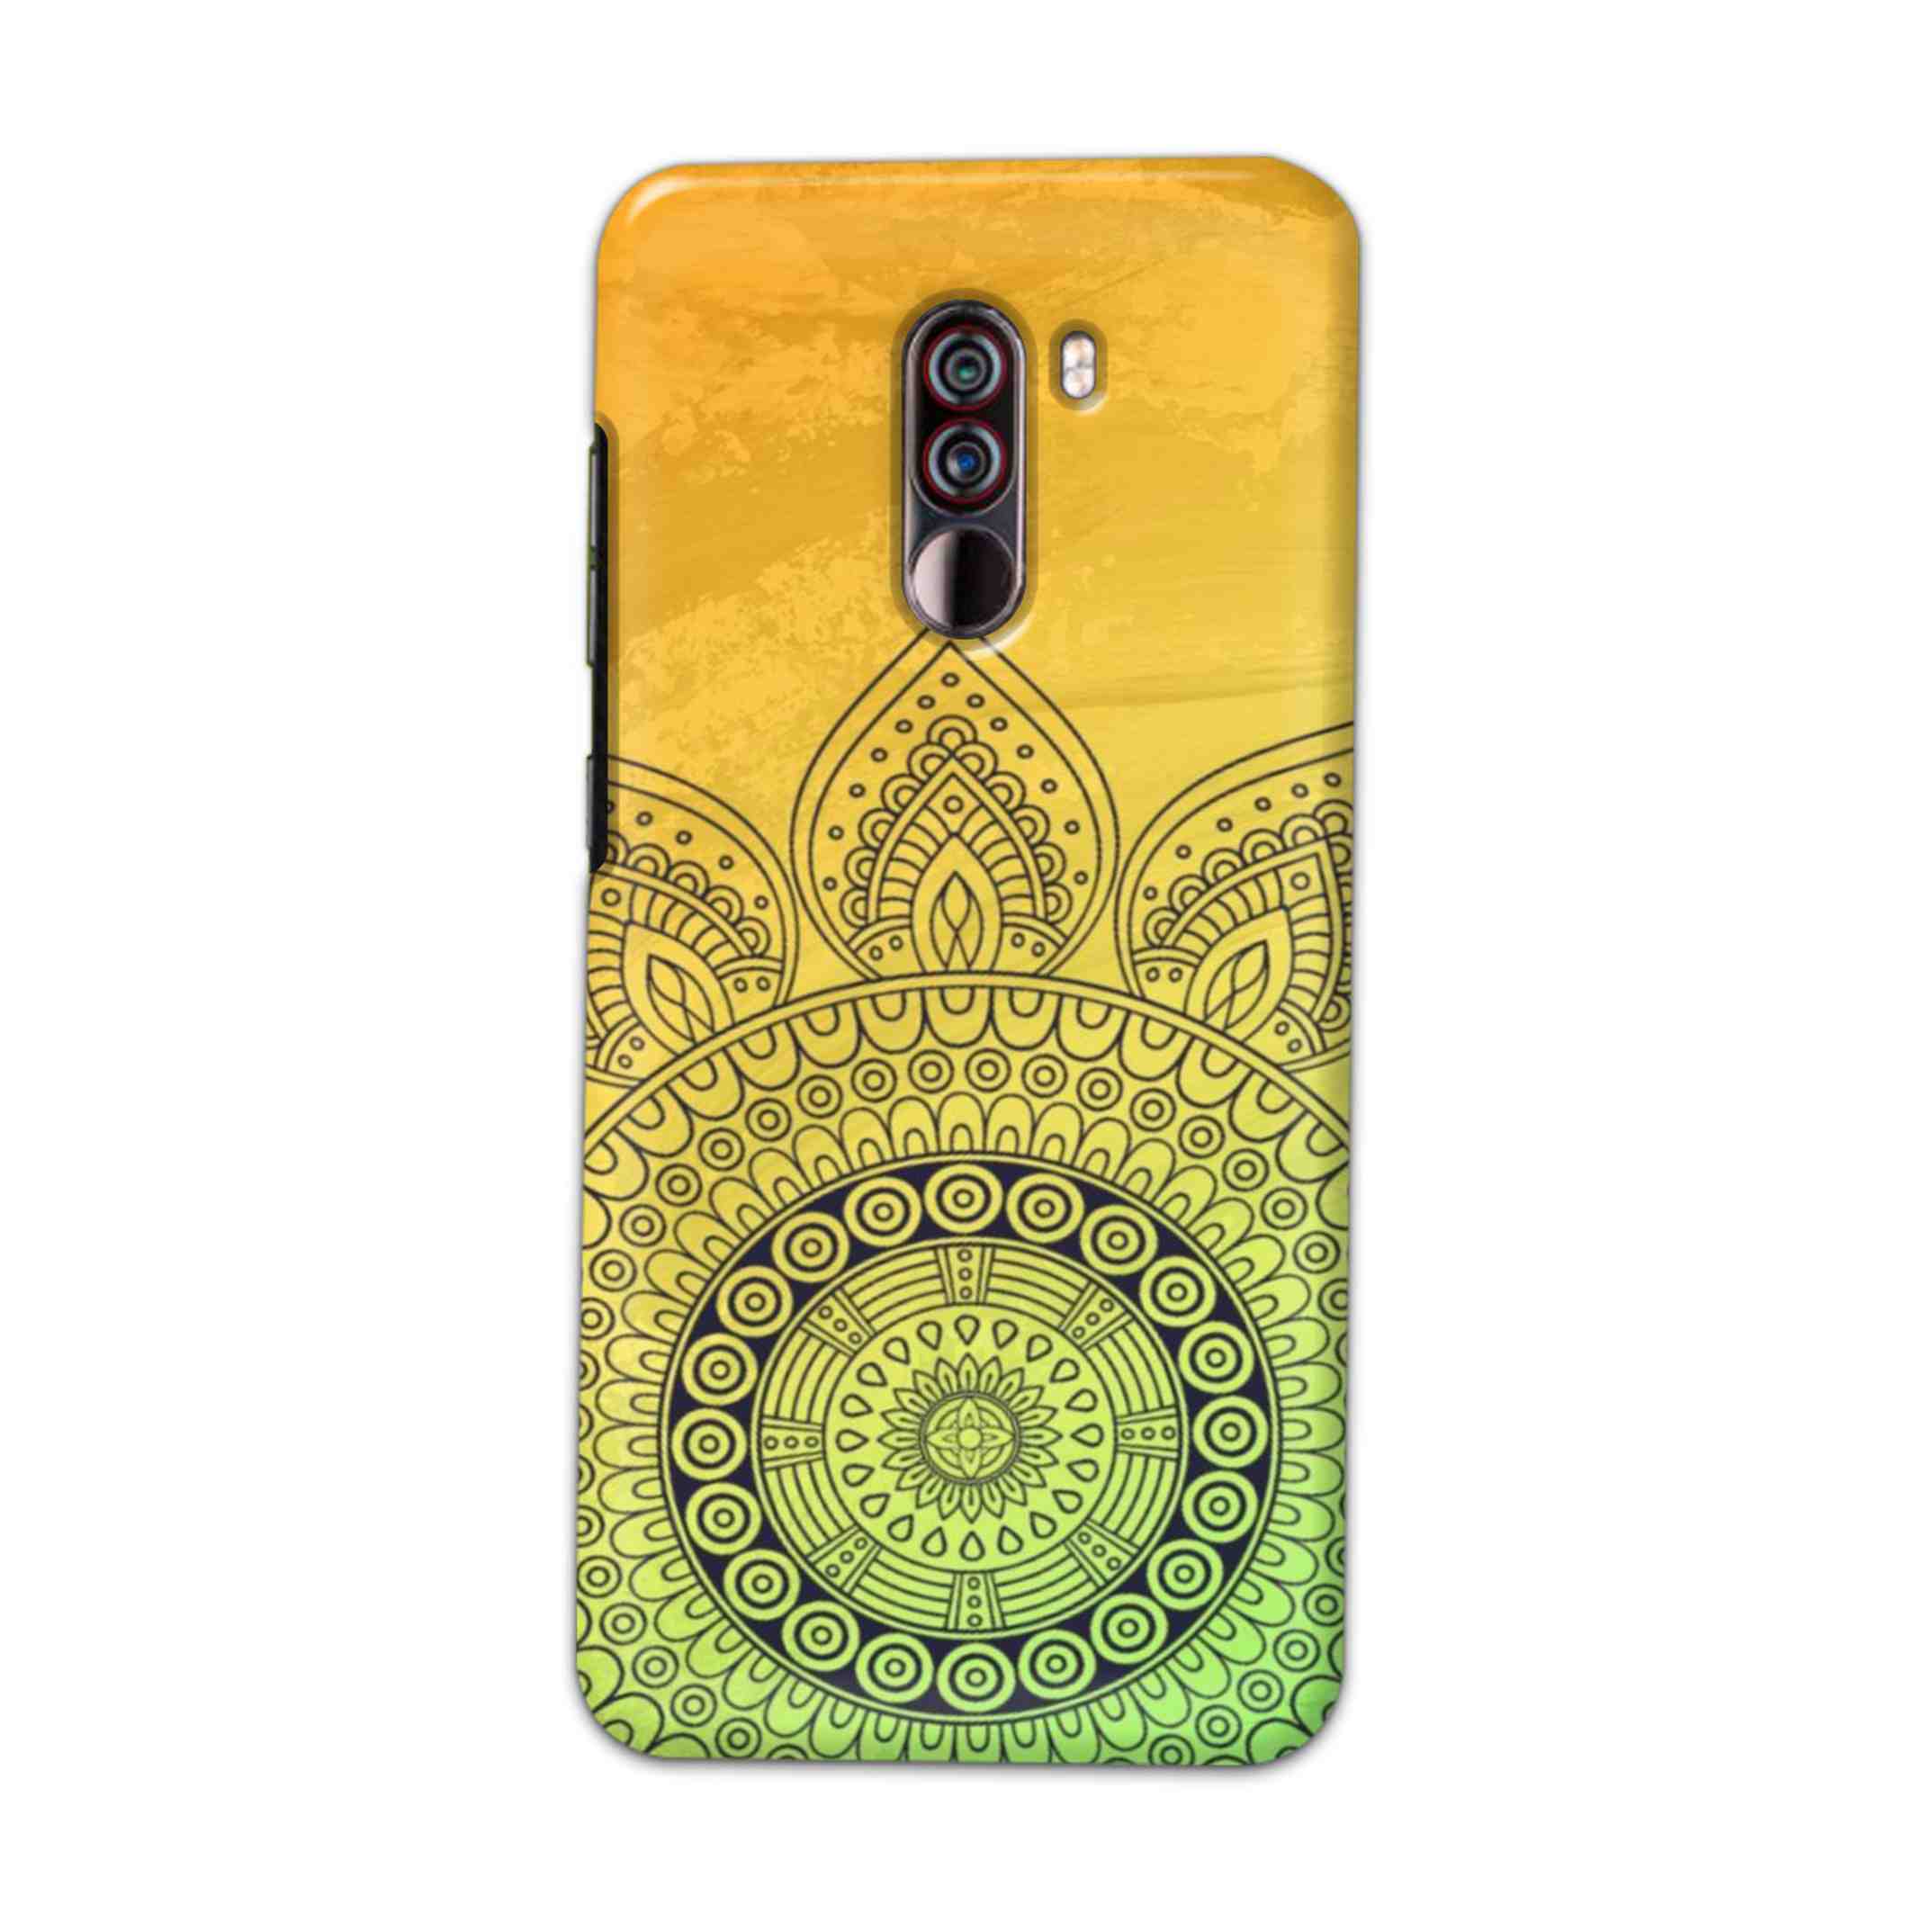 Buy Yellow Rangoli Hard Back Mobile Phone Case Cover For Xiaomi Pocophone F1 Online